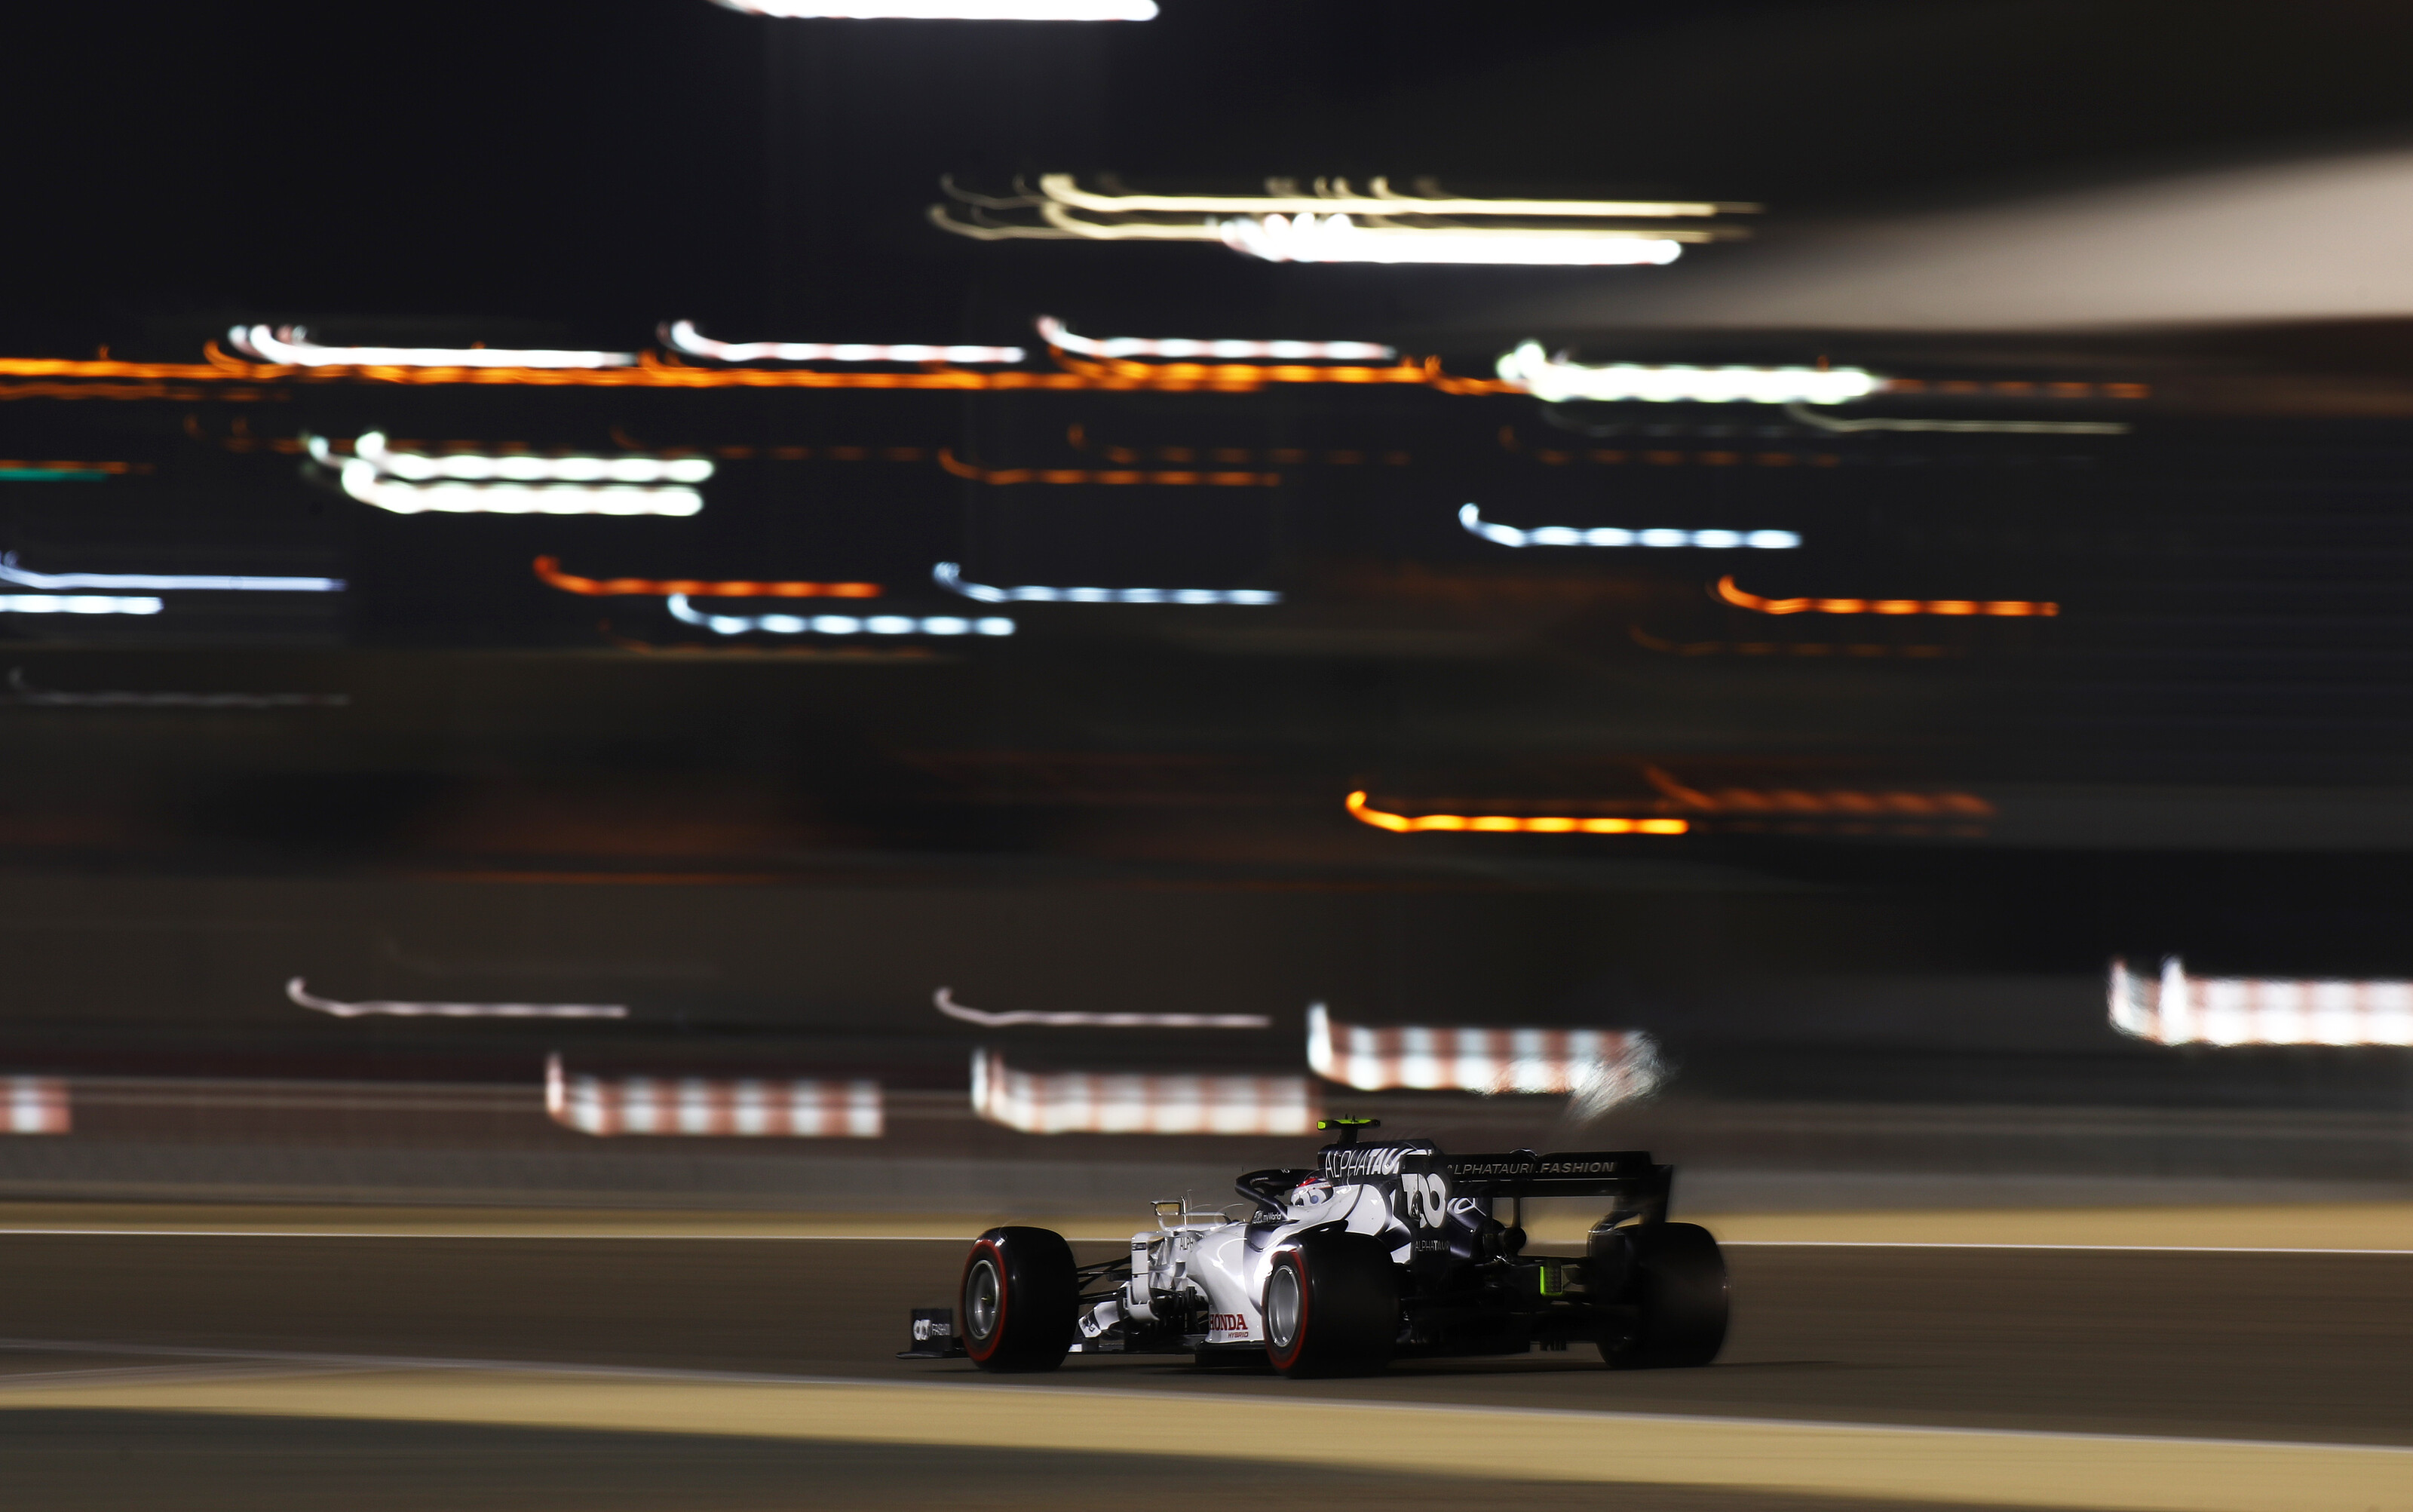 Scuderia AlphaTauri all know night picture are stunning, so why not add them to your wallpaper?